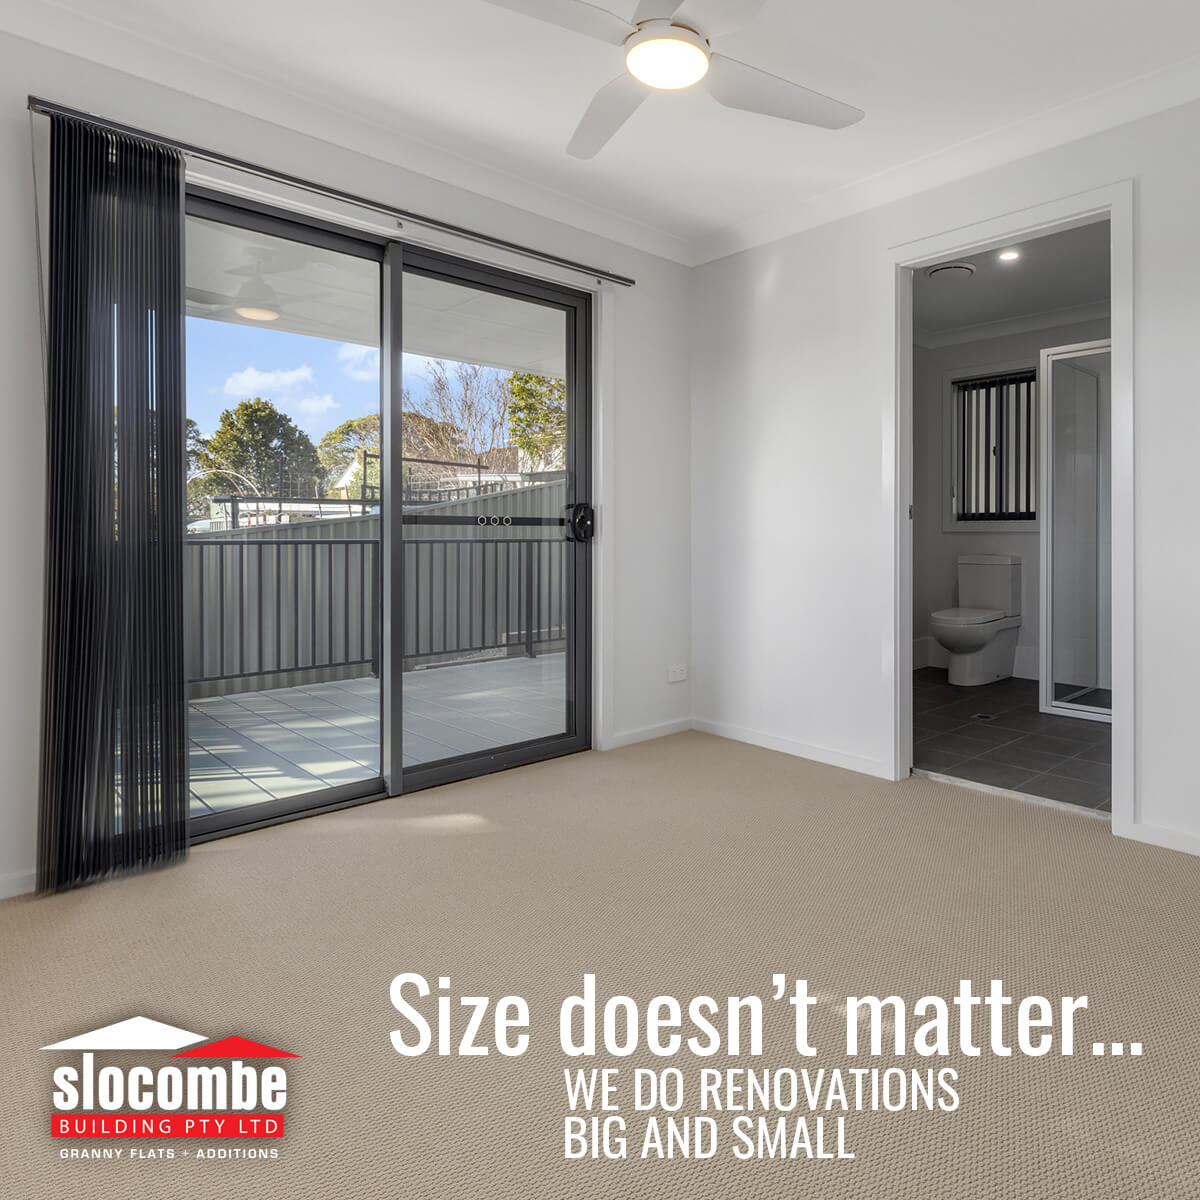 Slocombe Building Pty Ltd - Size doesn't matter...we do renovations big and small!